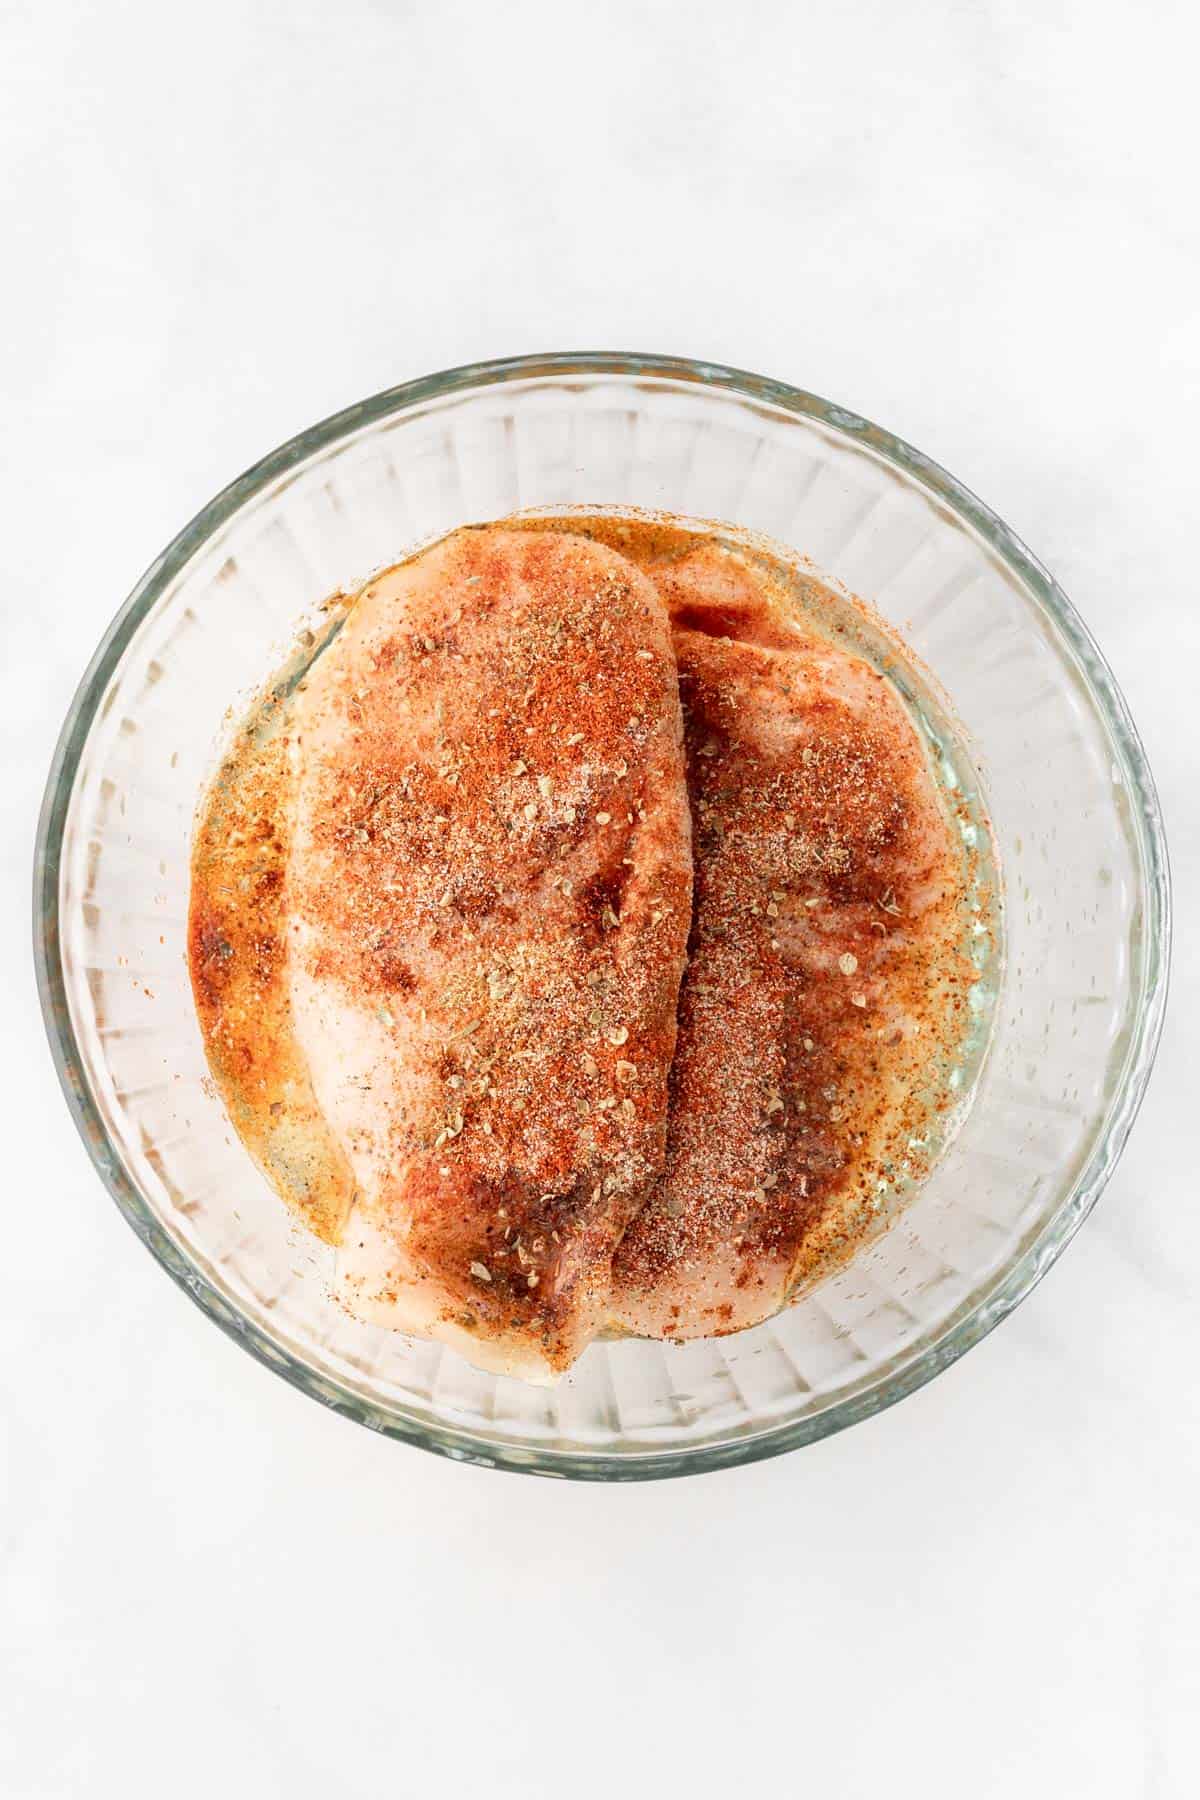 Chicken breasts marinating in a glass bowl with seasonings and lime juice.